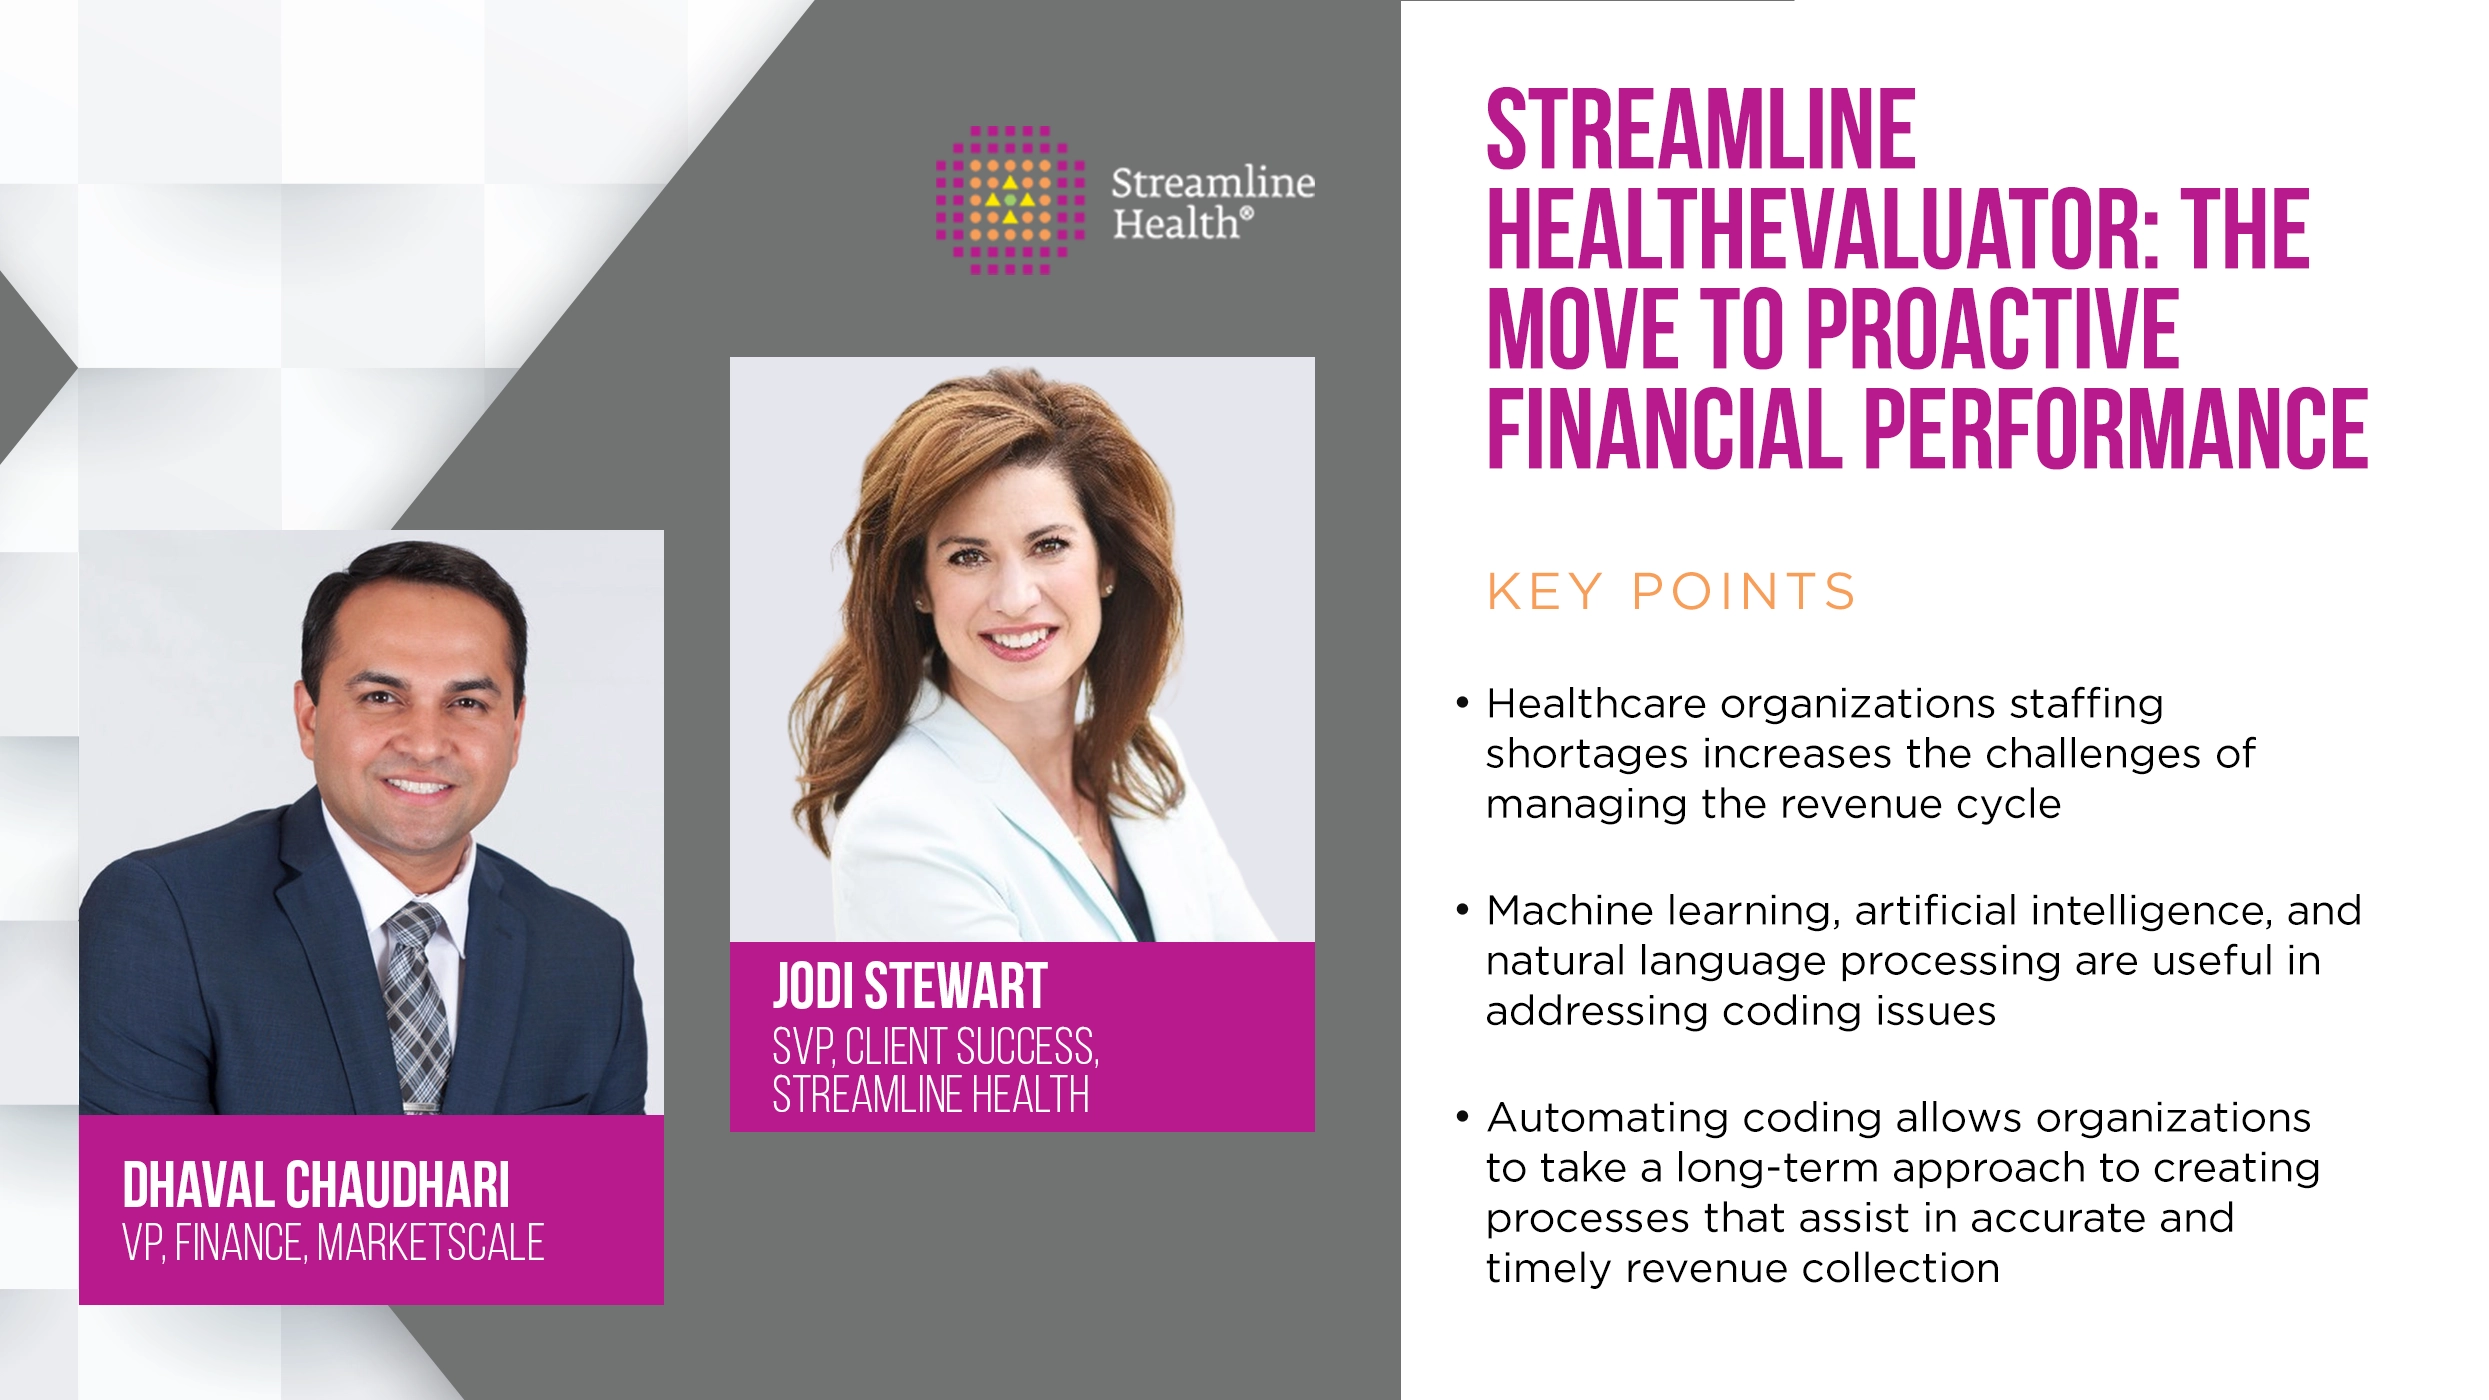 Streamline Health eValuator: The Move to Proactive Financial Performance Improvement